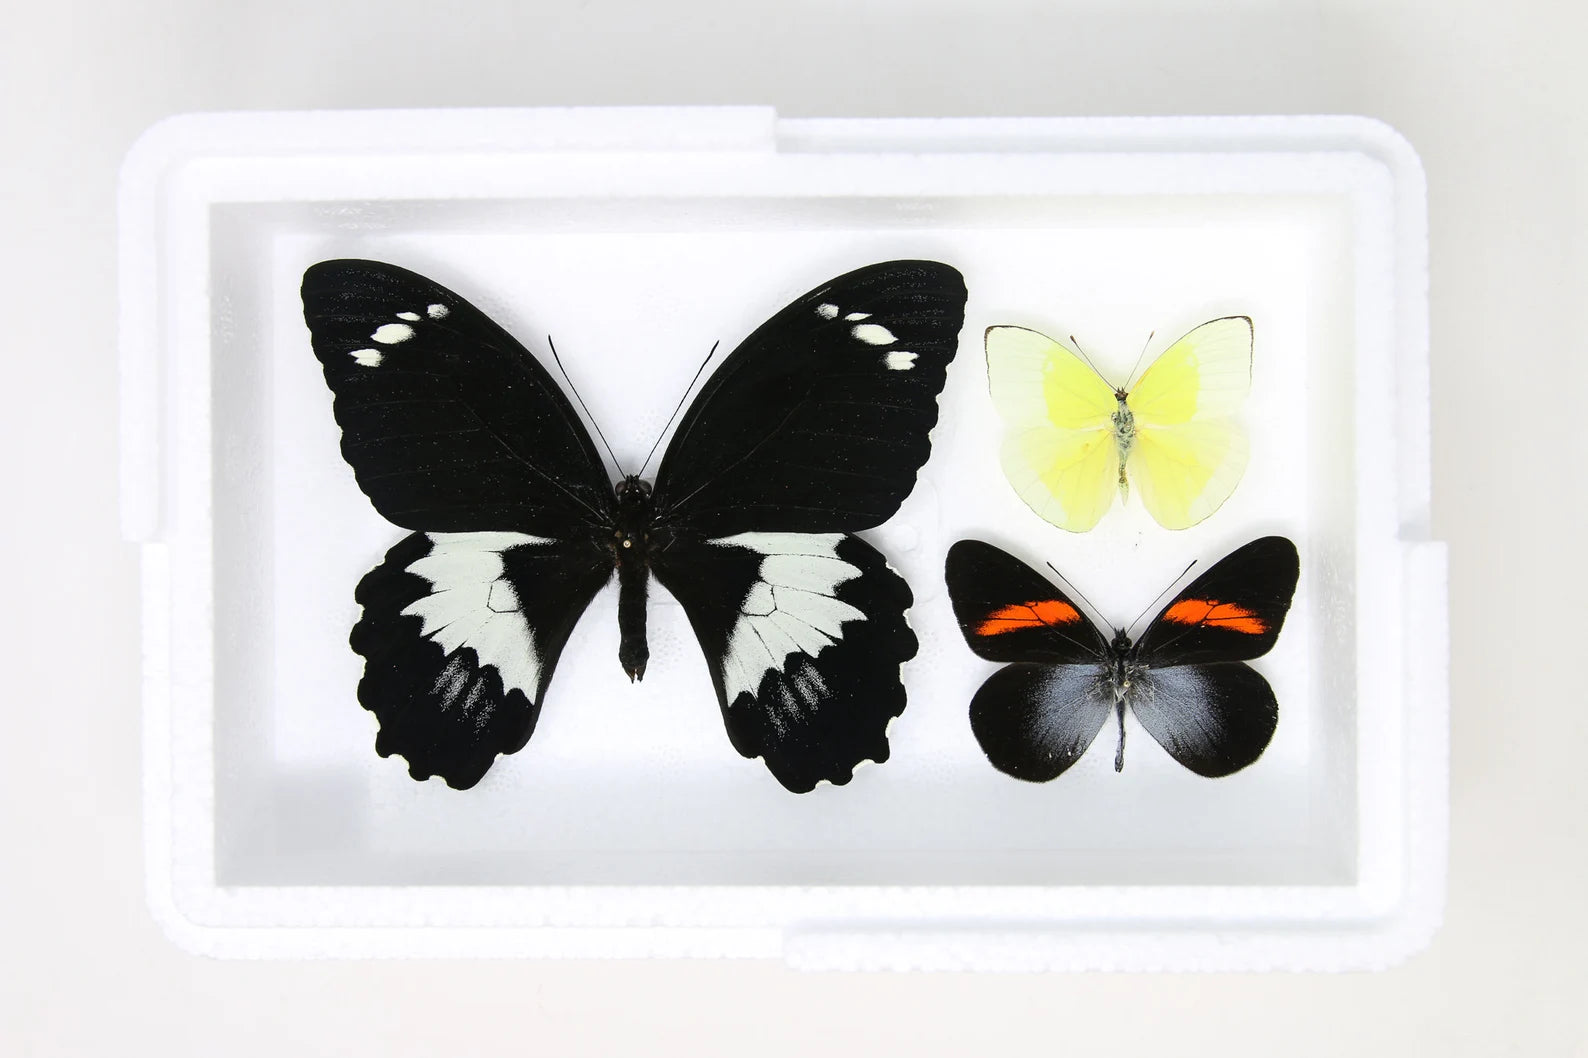 Pinned Tropical Butterflies, A1 Real Butterfly Pinned Set Specimens, Entomology Taxidermy (#BUT88)